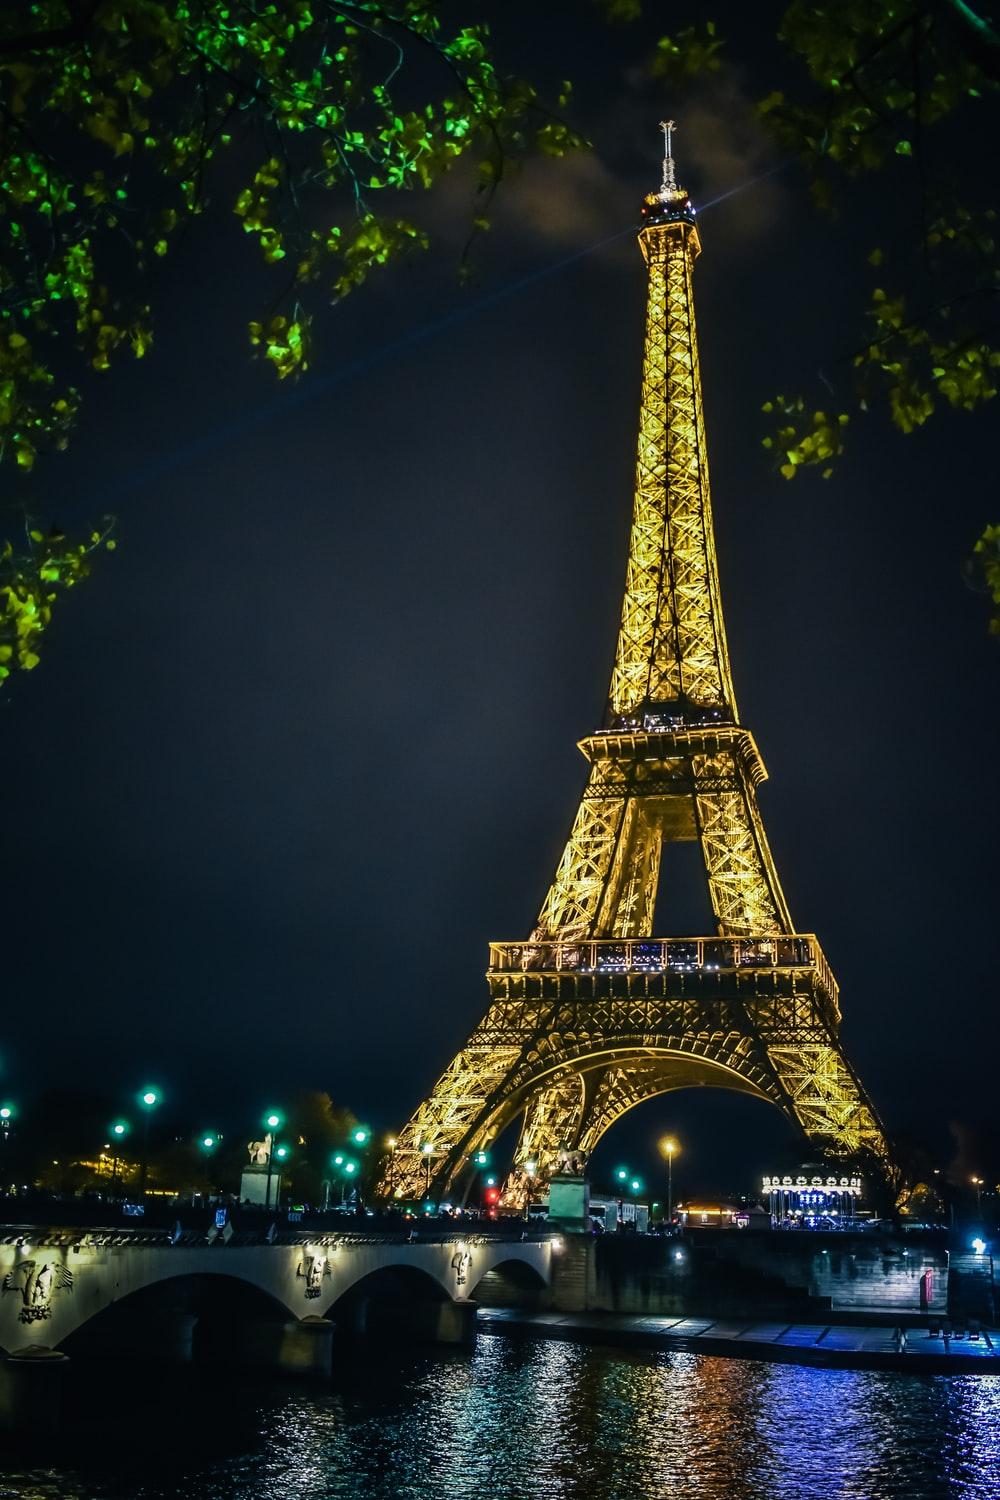 Eiffel Tower Image [HD]. Download Free